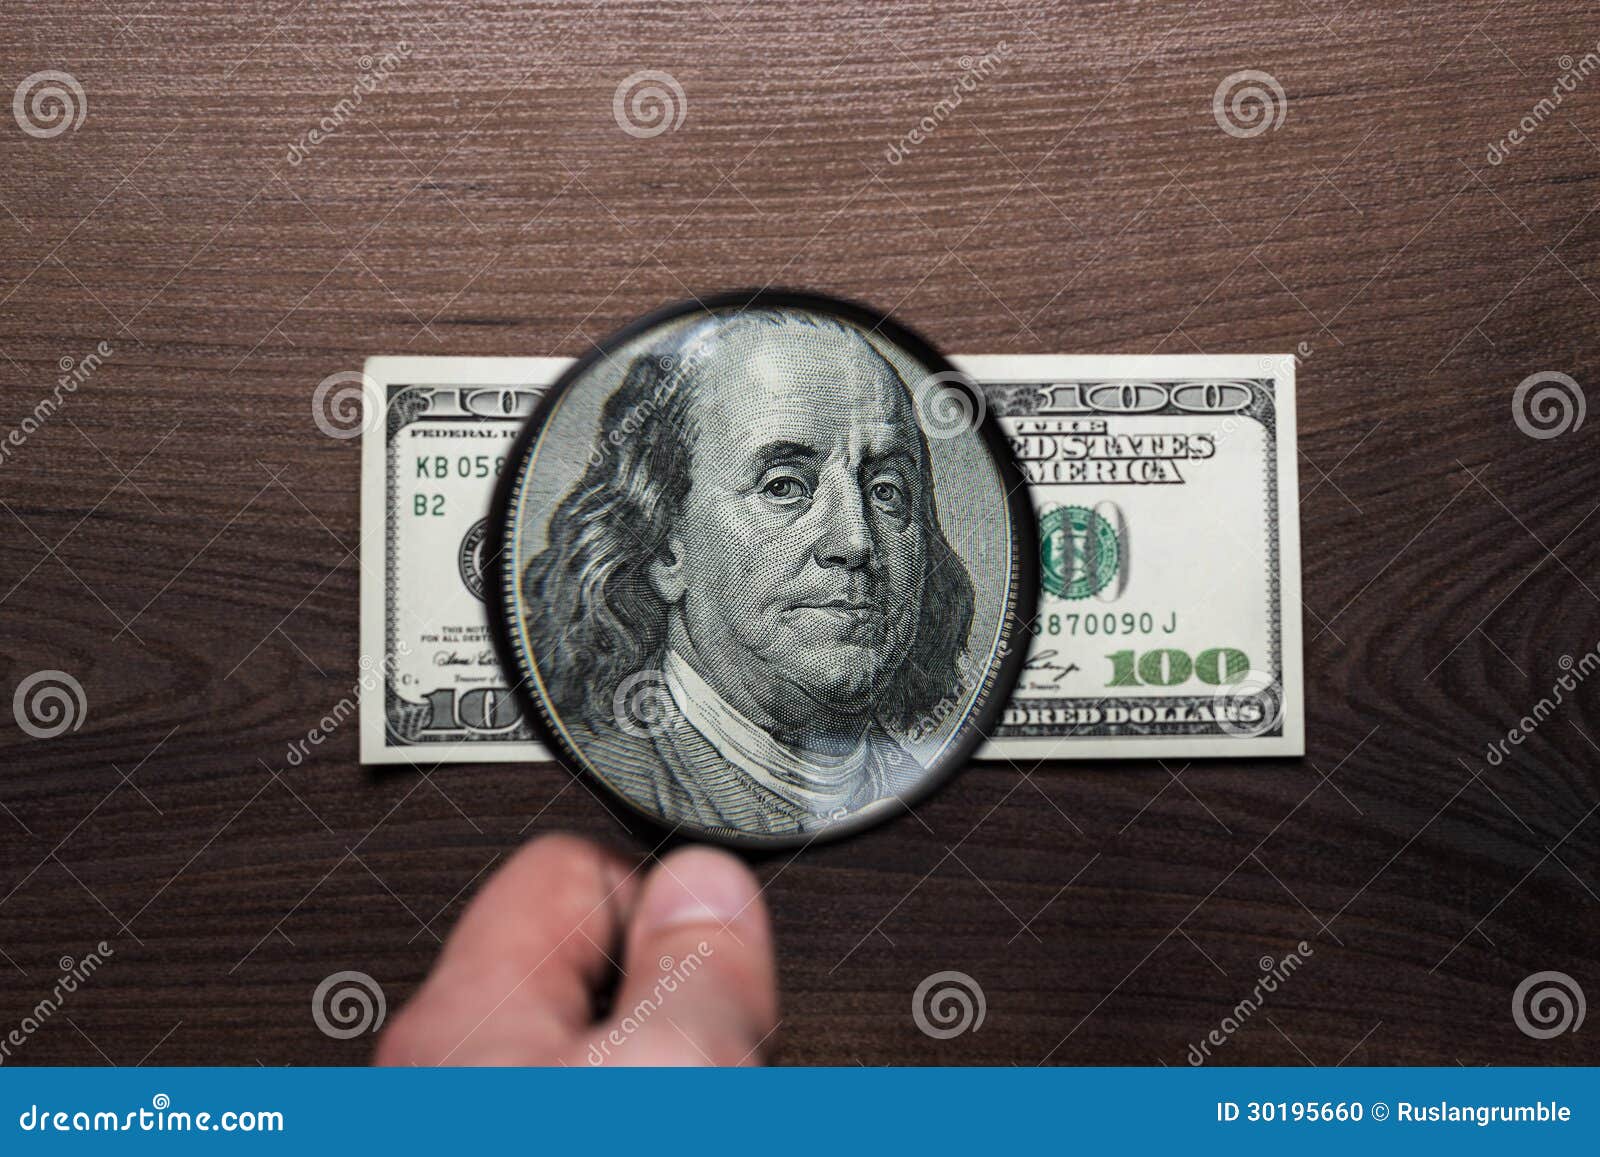 one hundred dollars banknote authentication